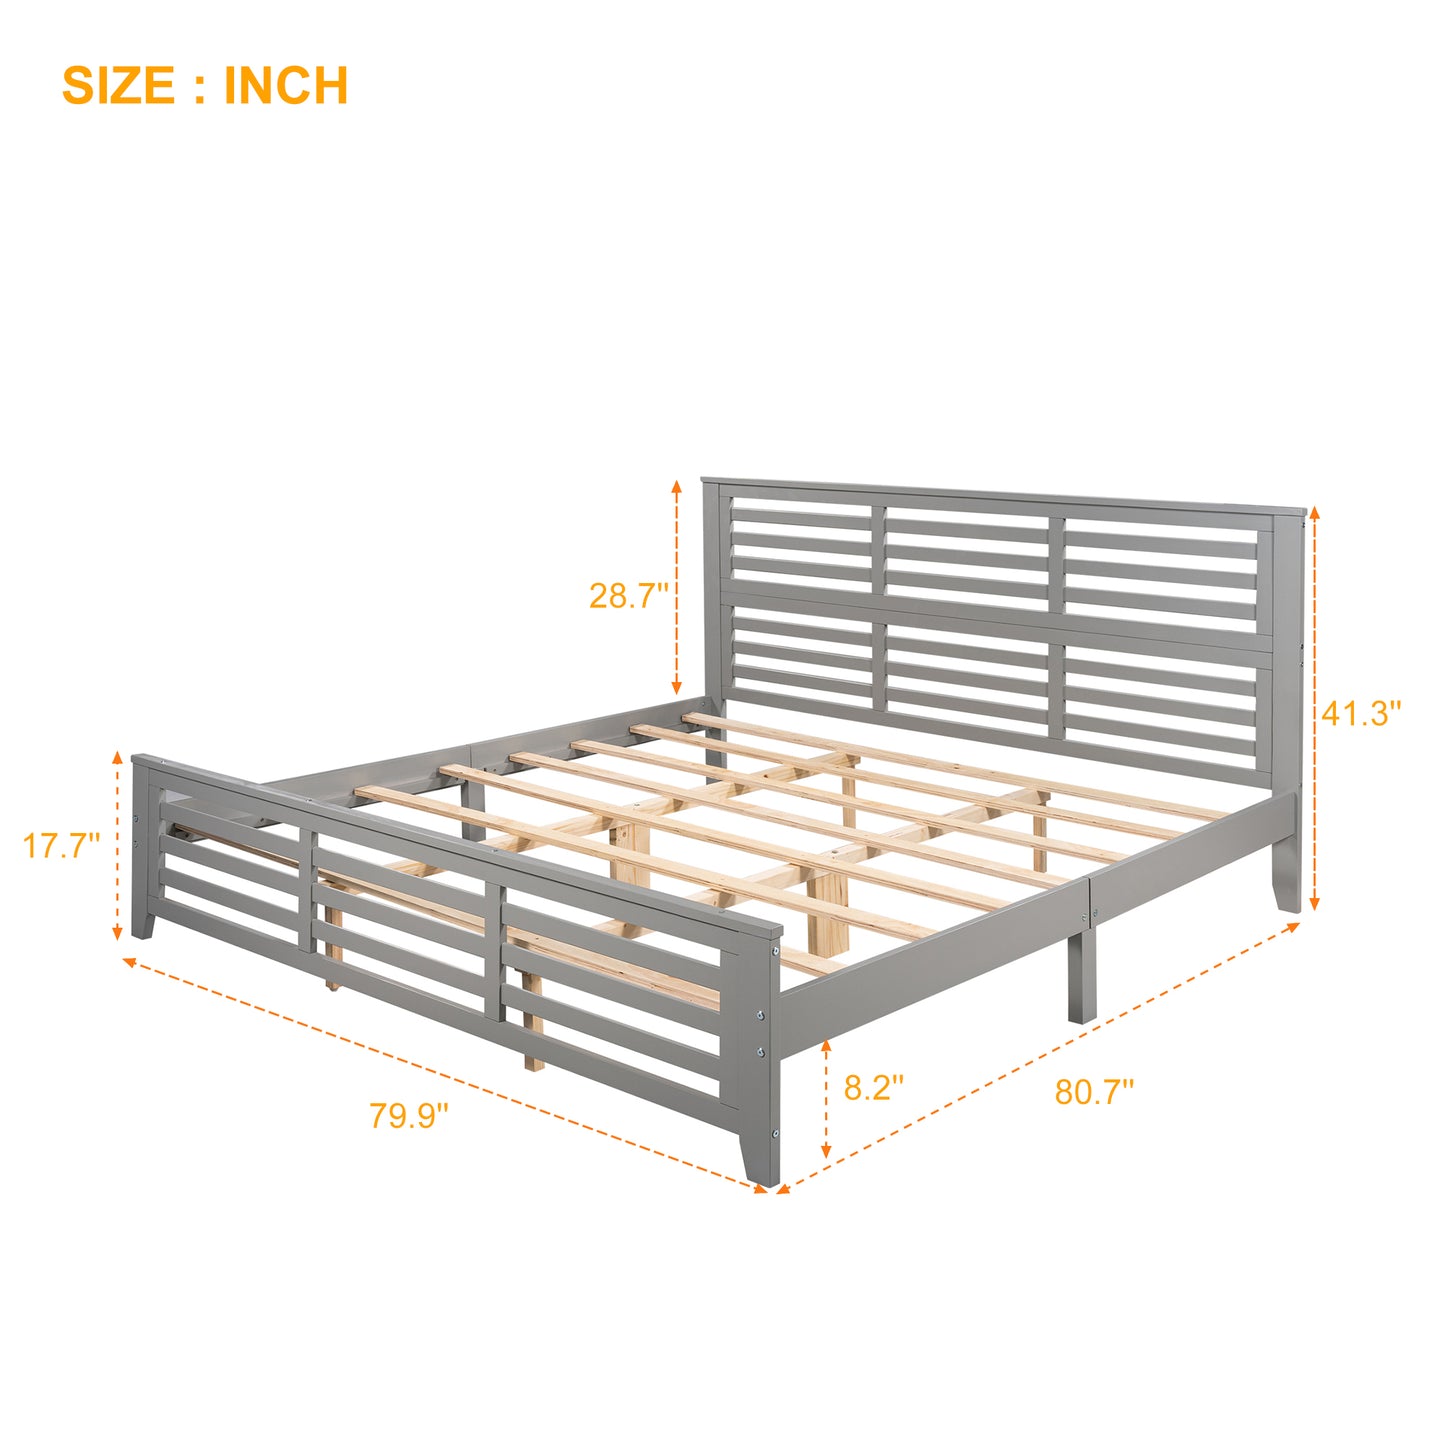 SYNGAR King Size Bed Frame with Headboard, Platform Bed Frame Solid Wood with Headboard, 500lbs Weight Capacity, Gray, LJ2093